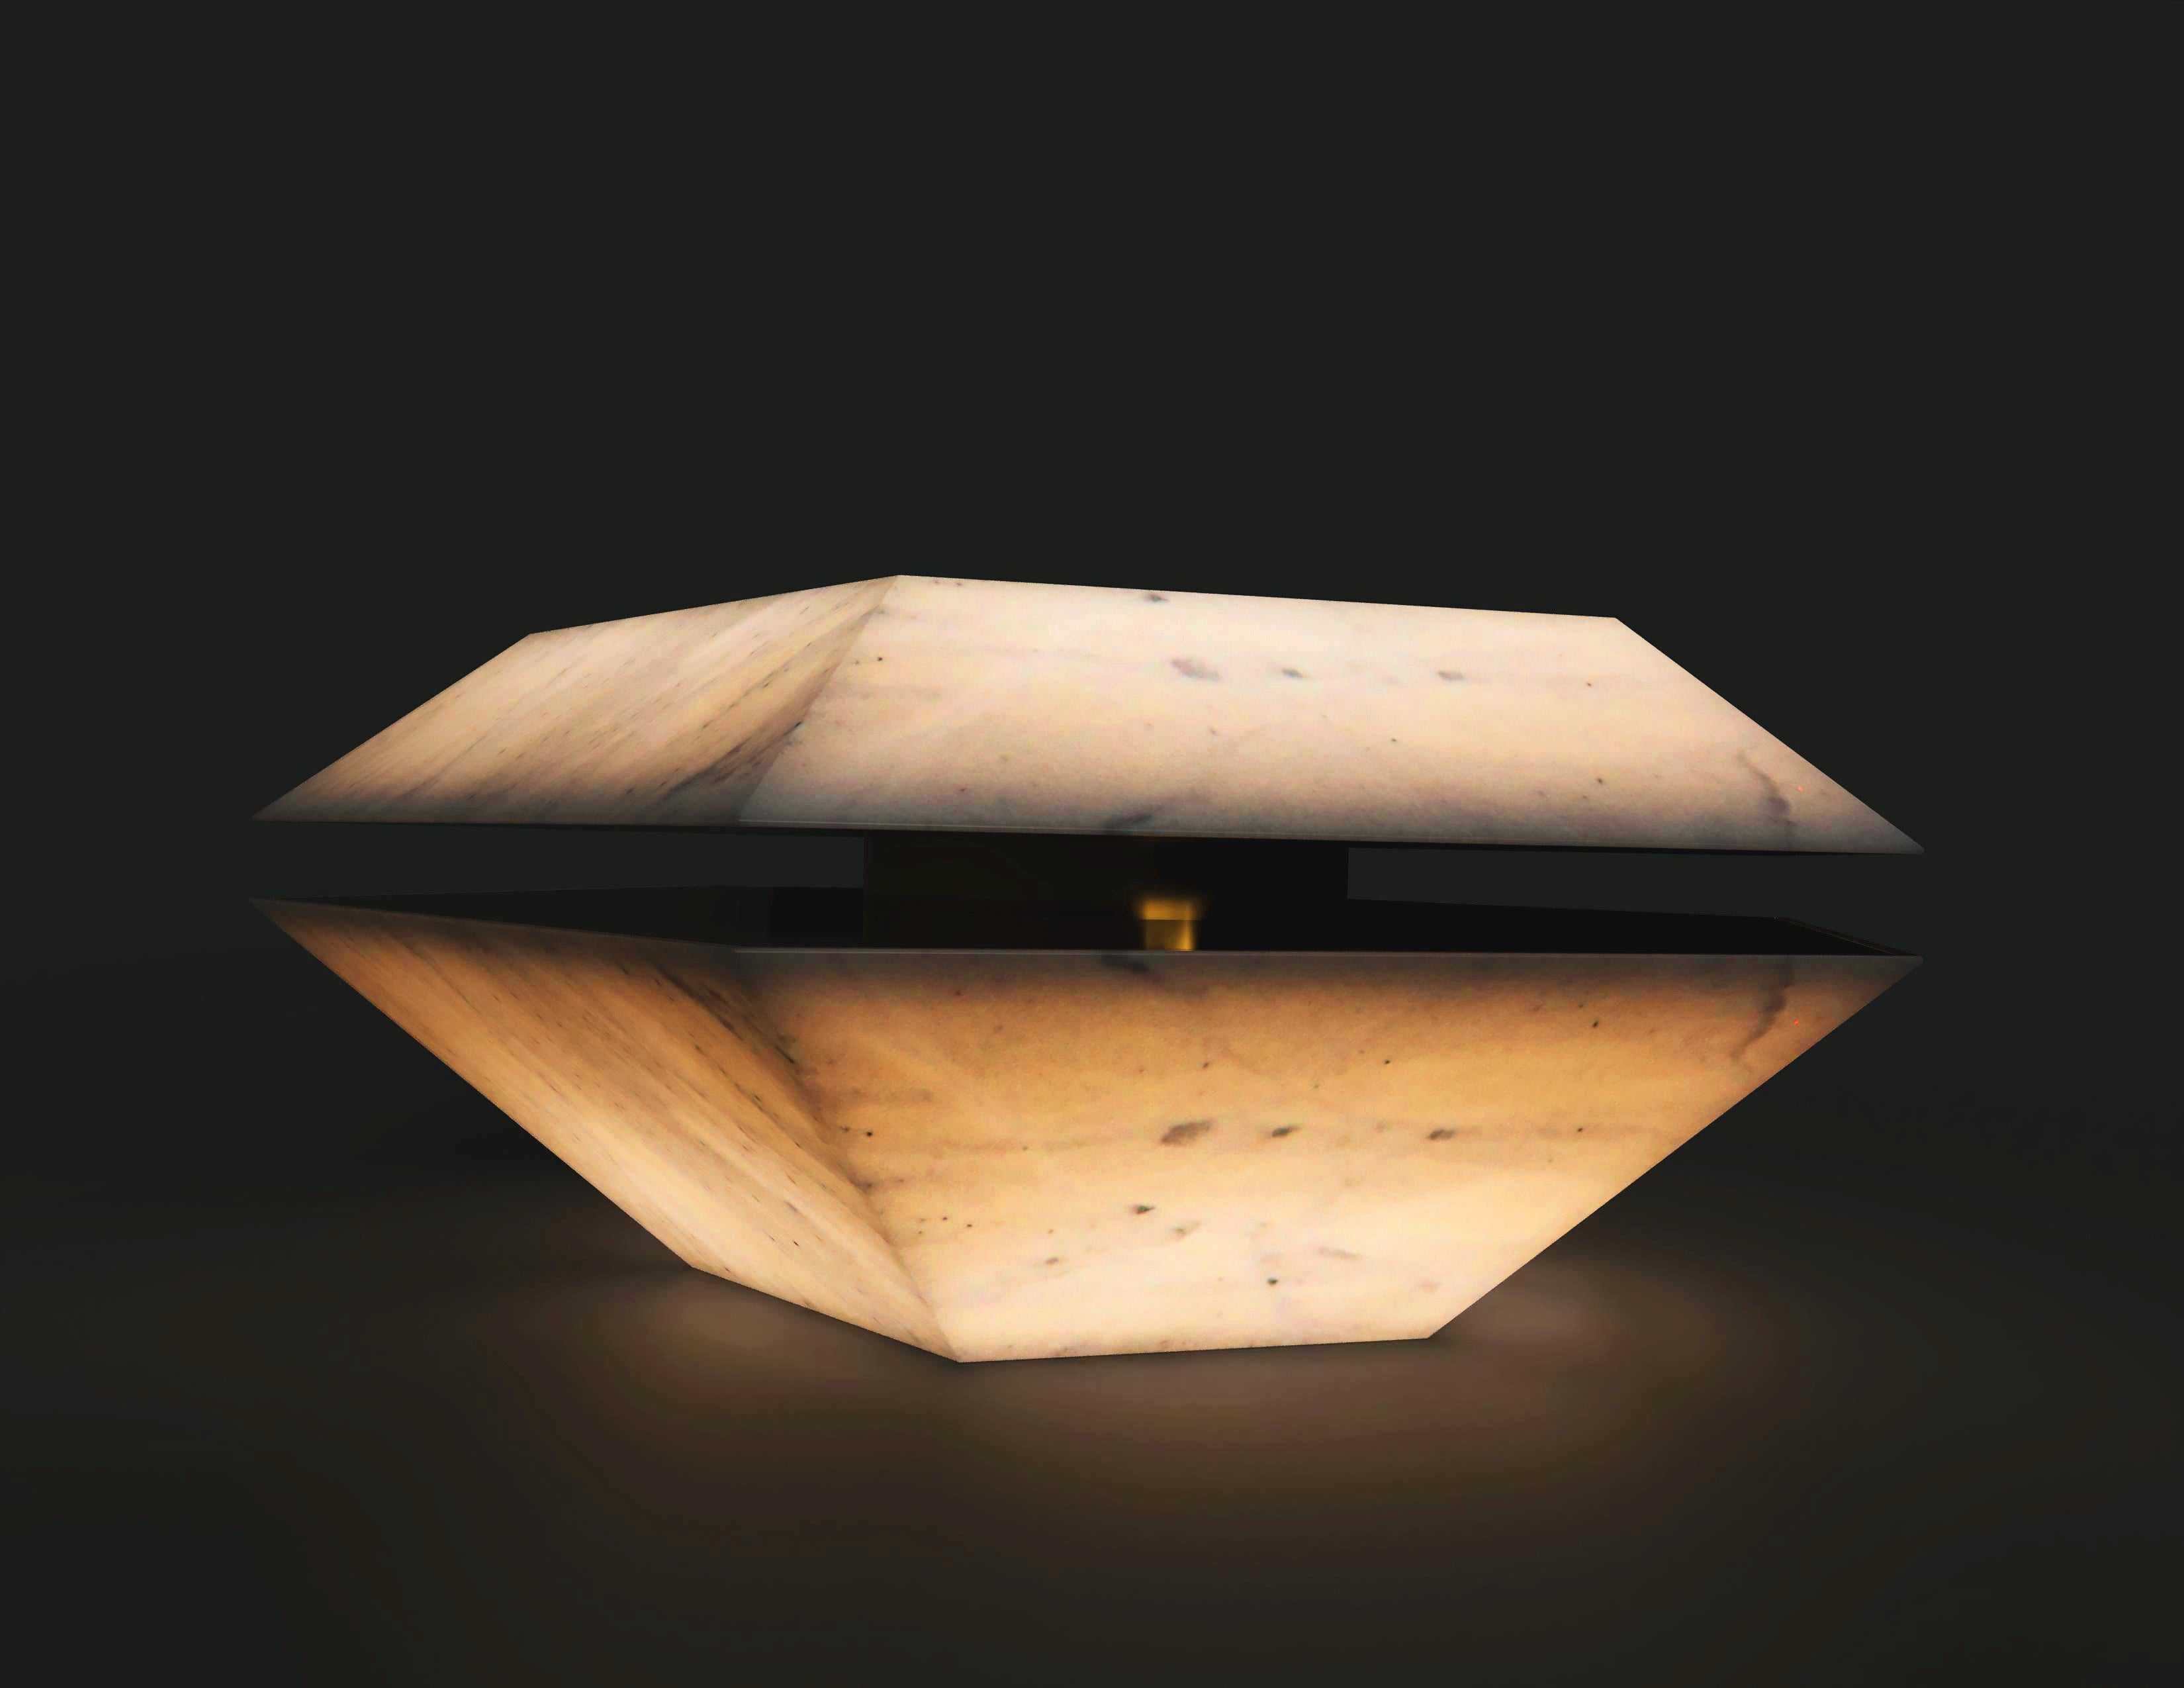 The Shell coffee table by Grzegorz Majka, 2021
Dimensions: 45.67 x 39.37 x 17.72 in
Materials: stone

While searching the highest quality materials we have encountered the beautiful piece directly from Afghanistan which inspired to create the